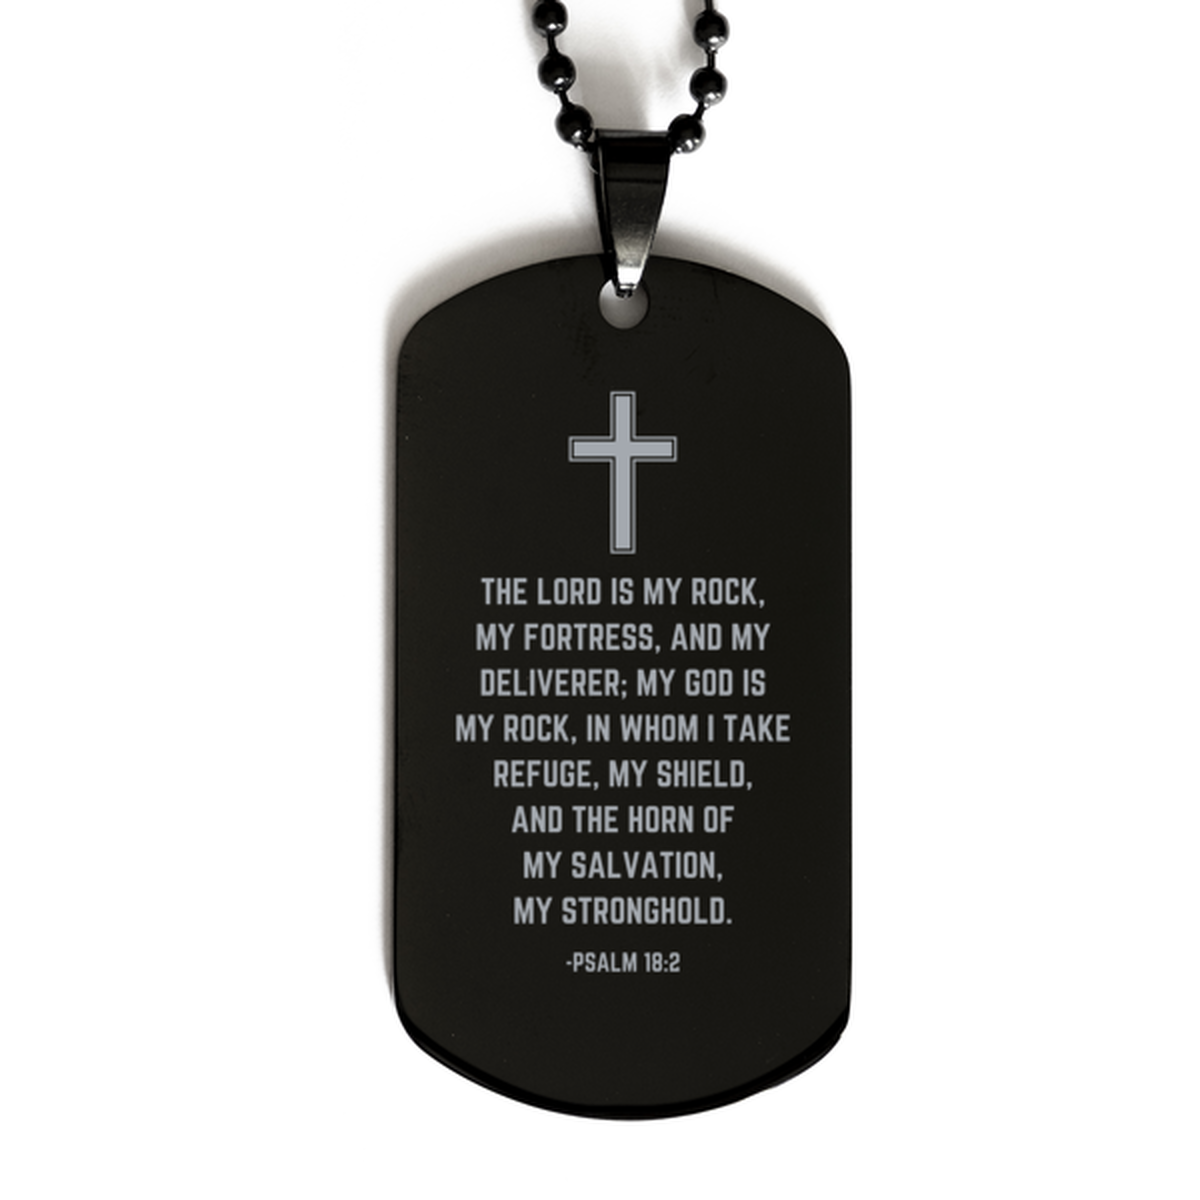 Baptism Gifts For Teenage Boys Girls, Christian Bible Verse Black Dog Tag, The Lord is my rock, Confirmation Gifts, Bible Verse Necklace for Son, Godson, Grandson, Nephew